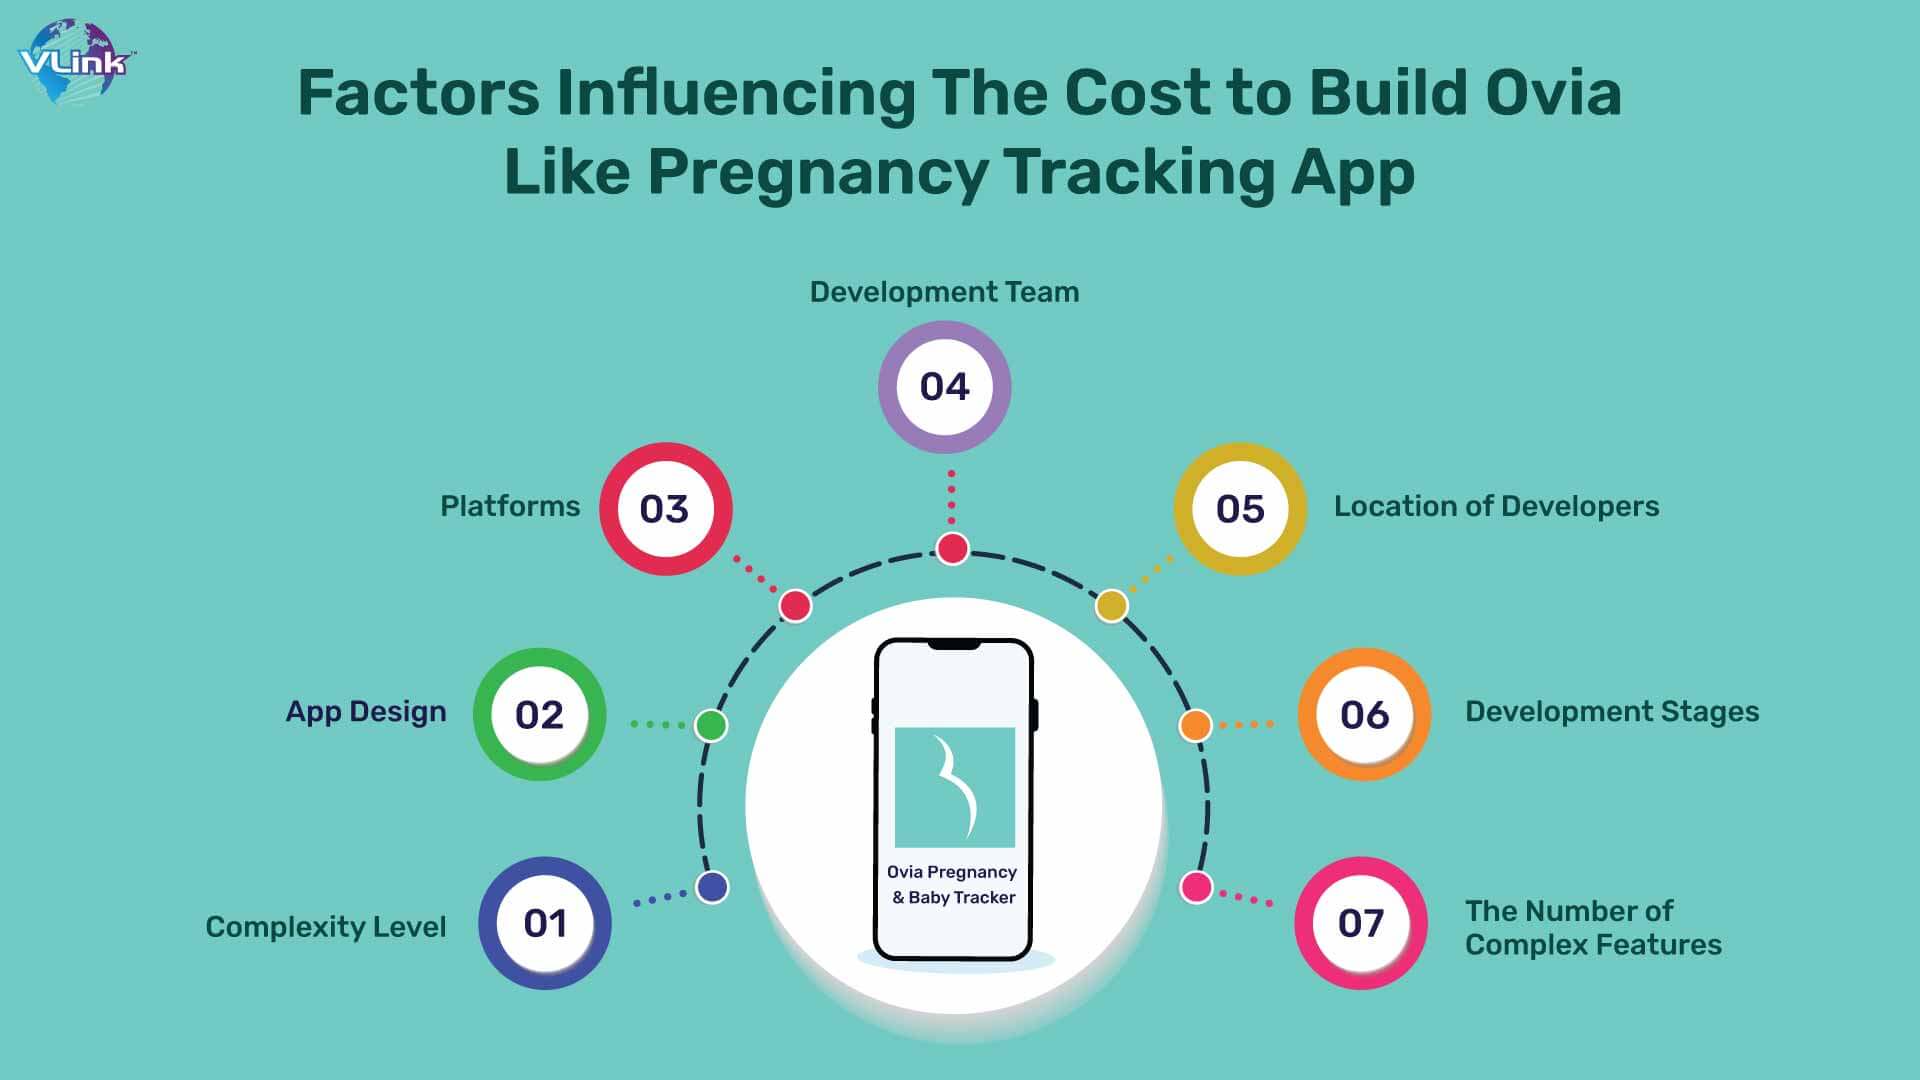 Factors Influencing the Ovia like Pregnancy Tracking App Development Cost